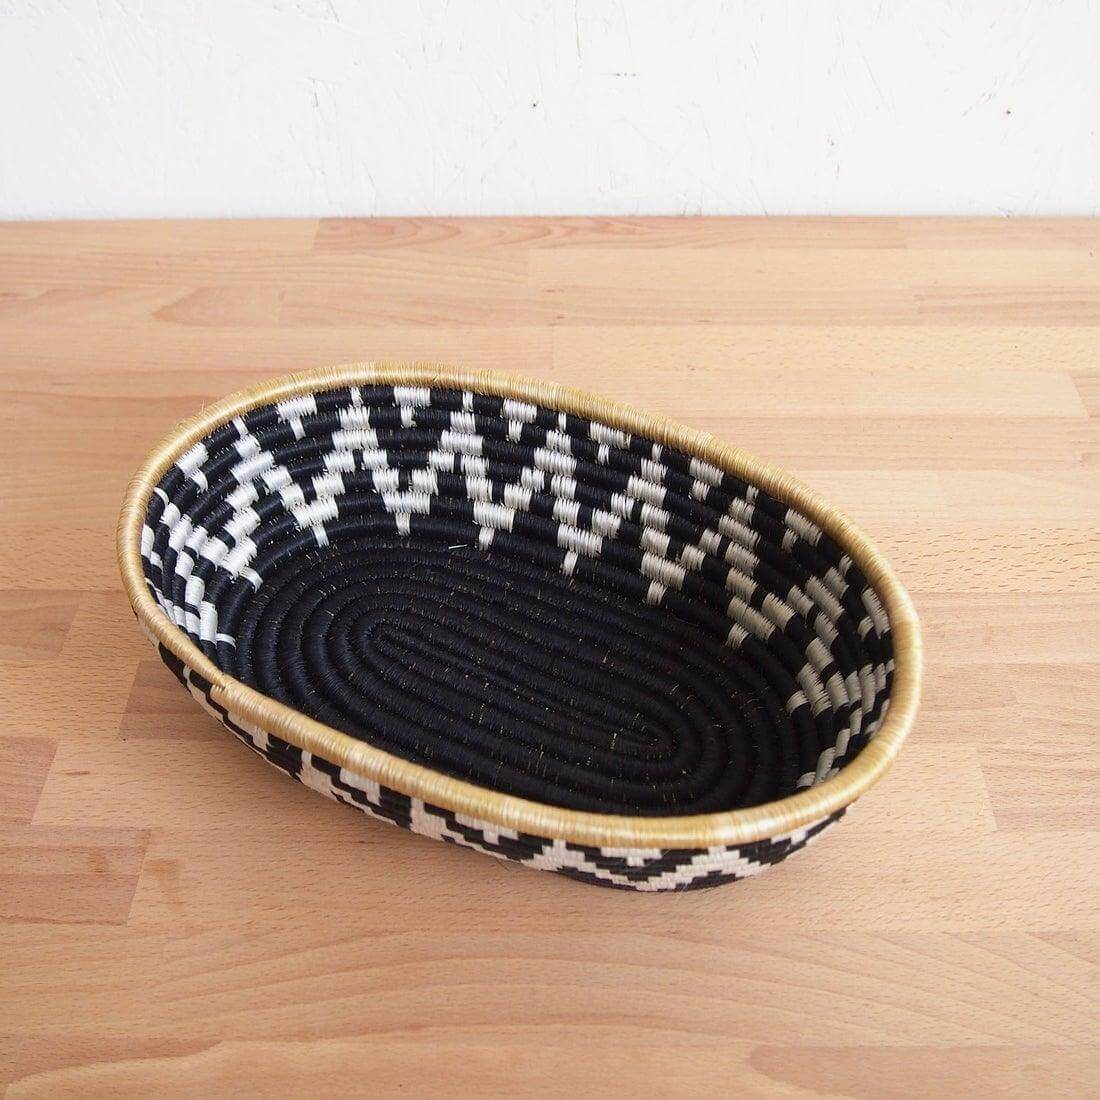 Handwoven bread basket from East Africa